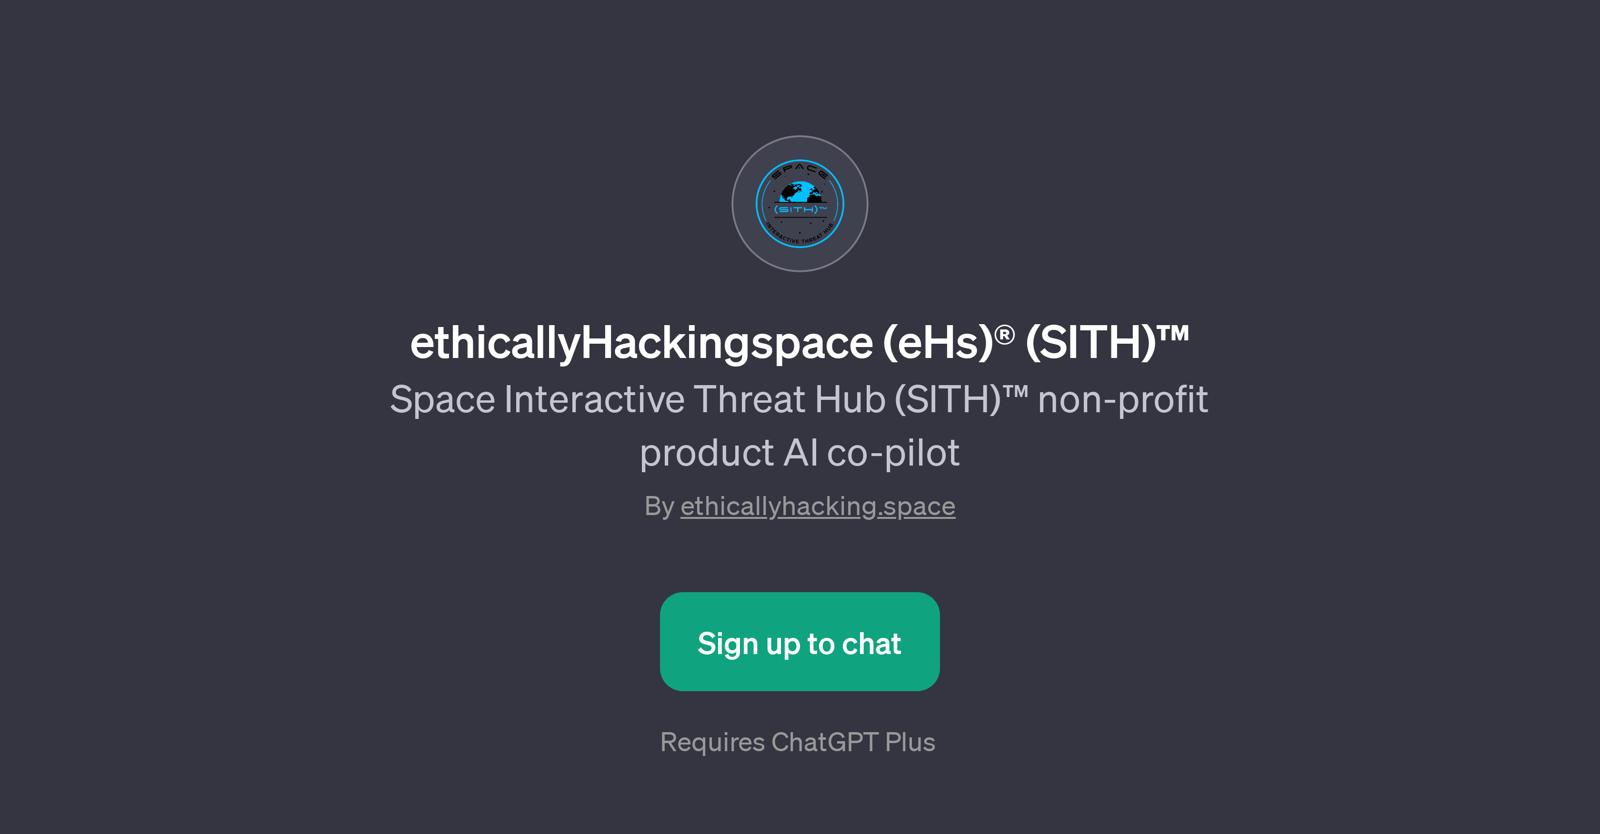 ethicallyHackingspace (eHs) (SITH) website